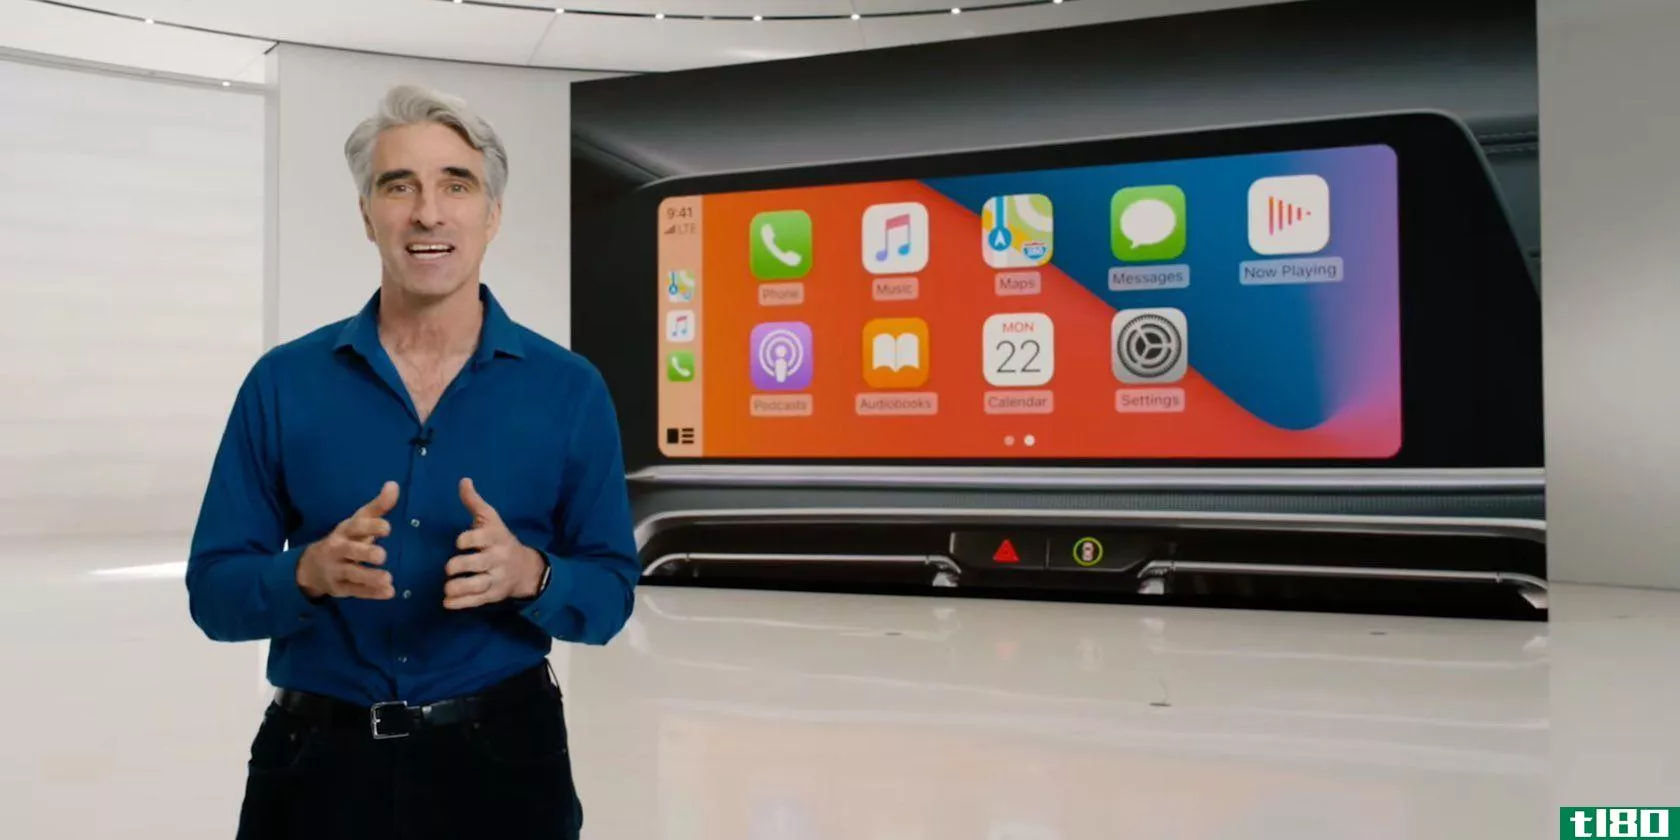 A still from the prerecorded WWDC 2020 presentation showing Craig Federighi, Apple's Senior Vice President of Software Engineering, in front of a CarPlay slide